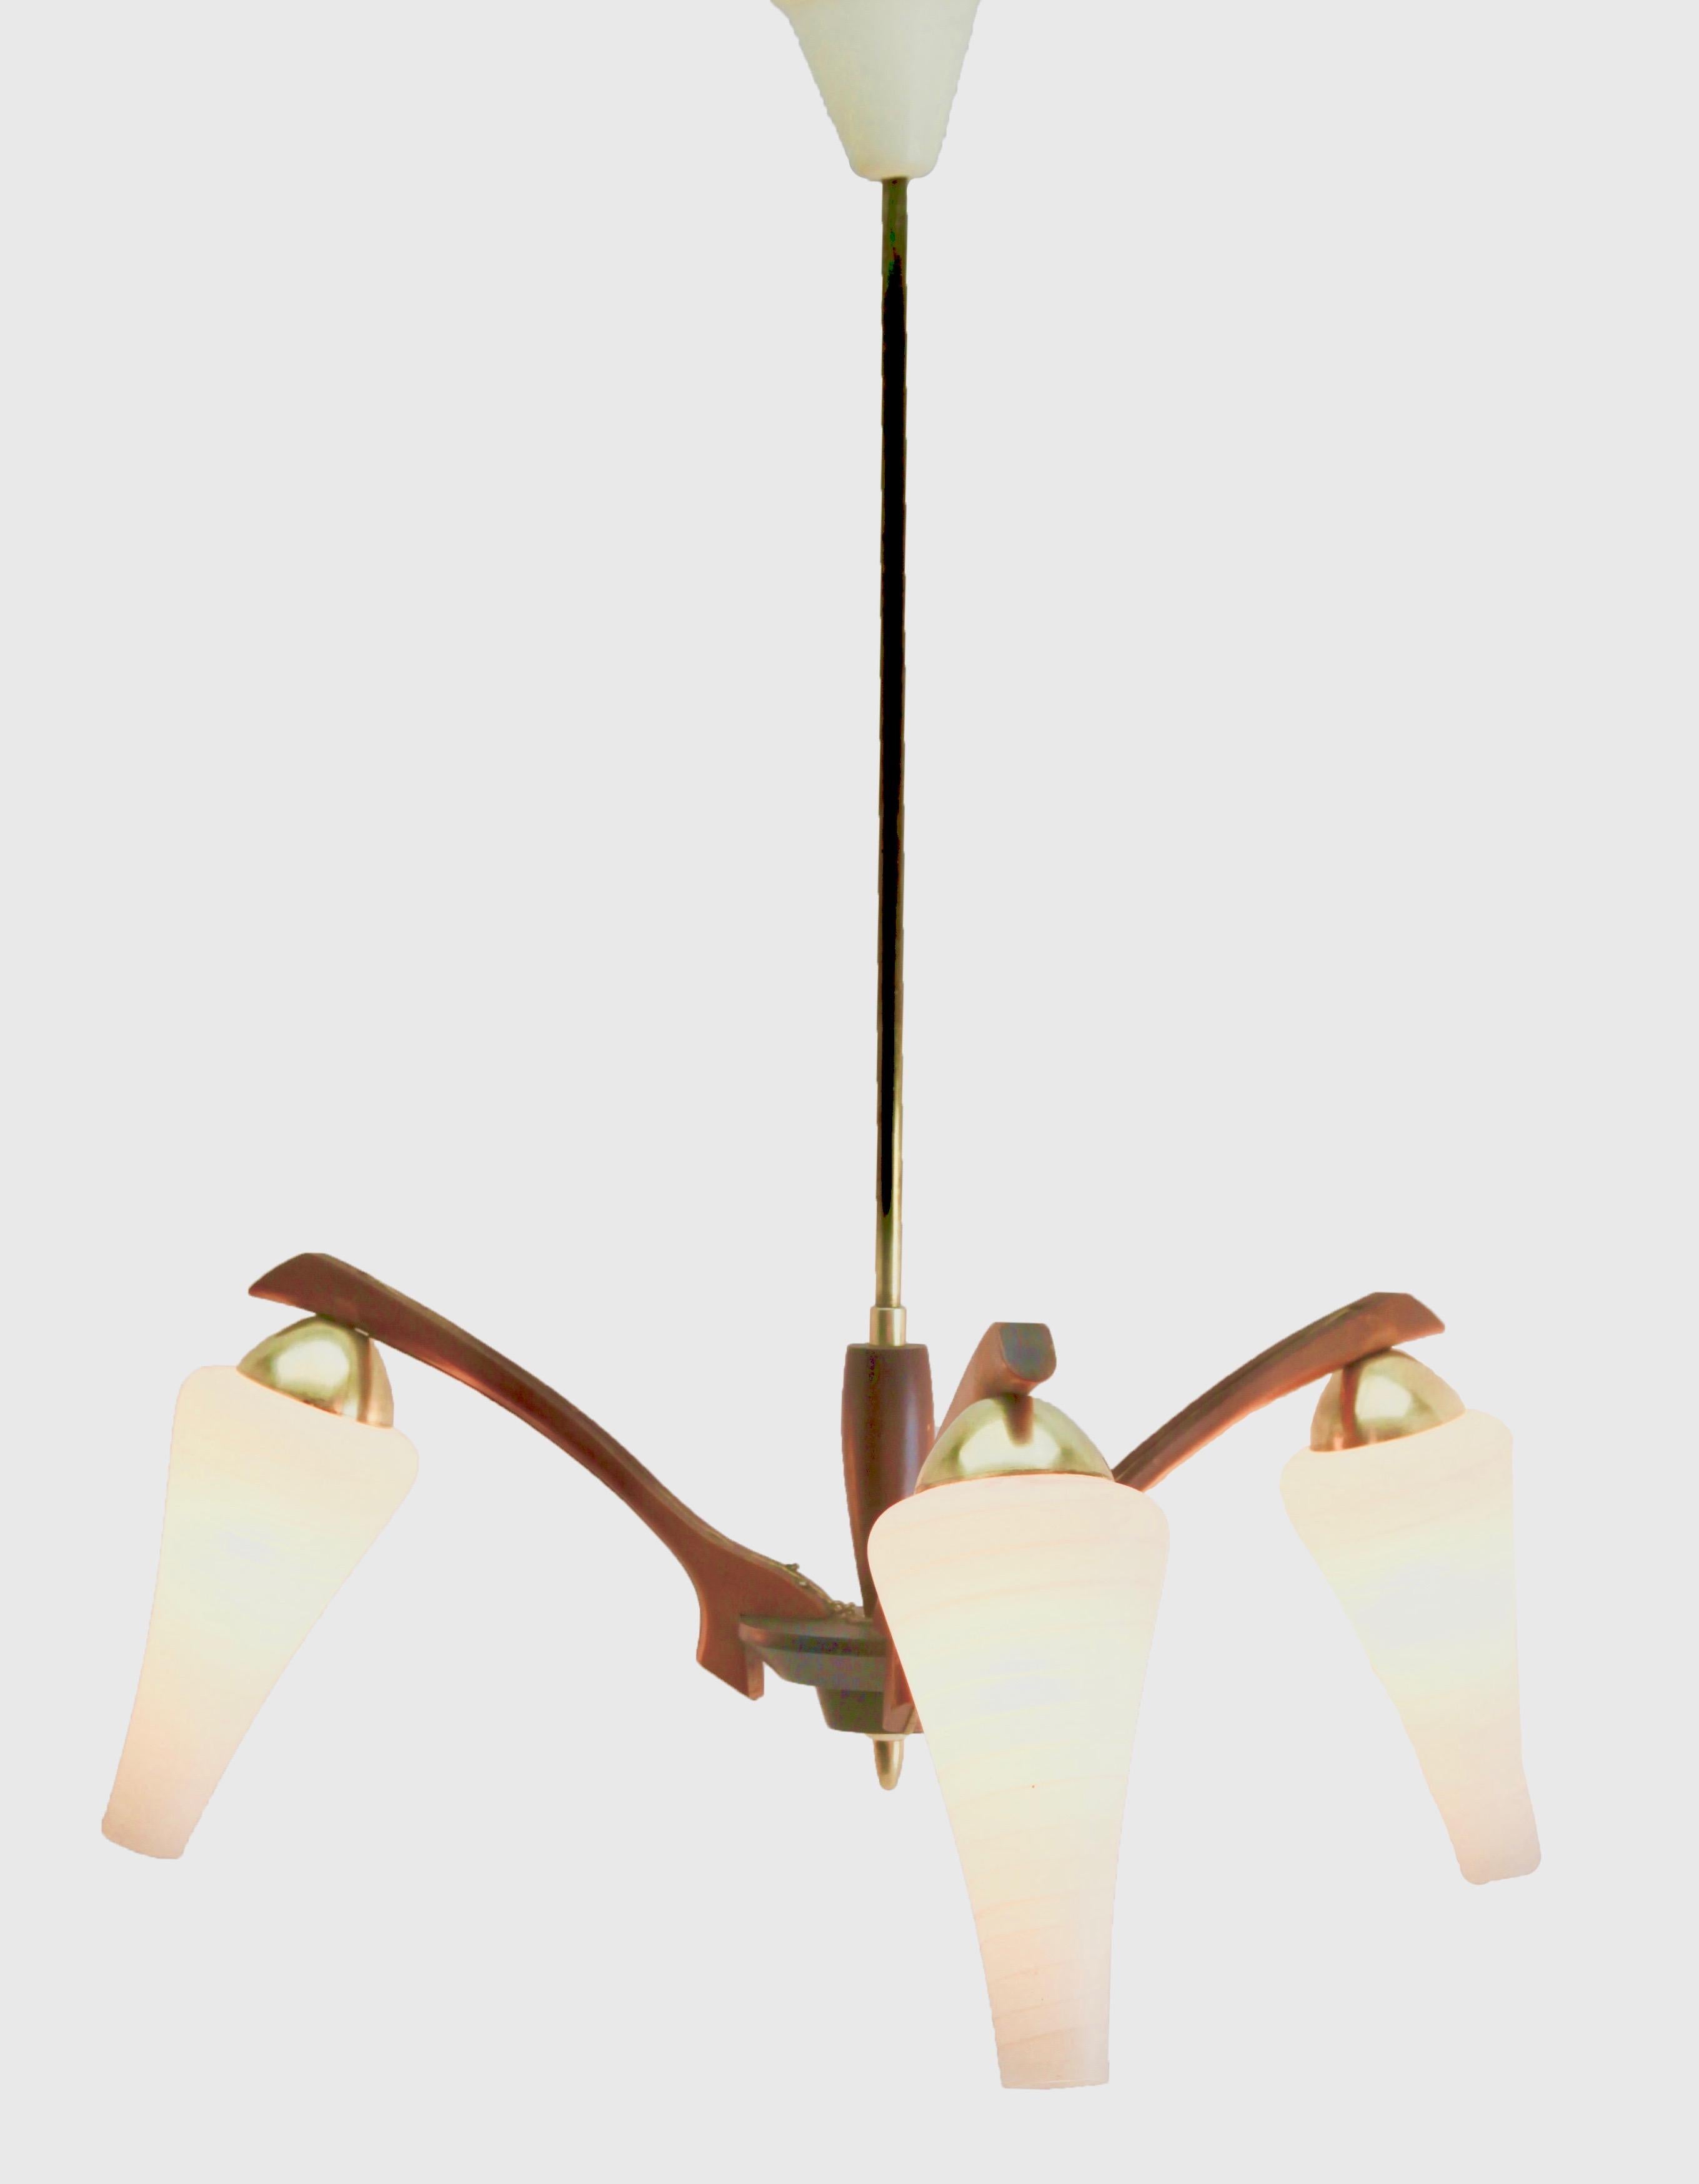 Vintage Chandelier Three Arms in the Style of Stilnovo, Italian, 1960s For Sale 3